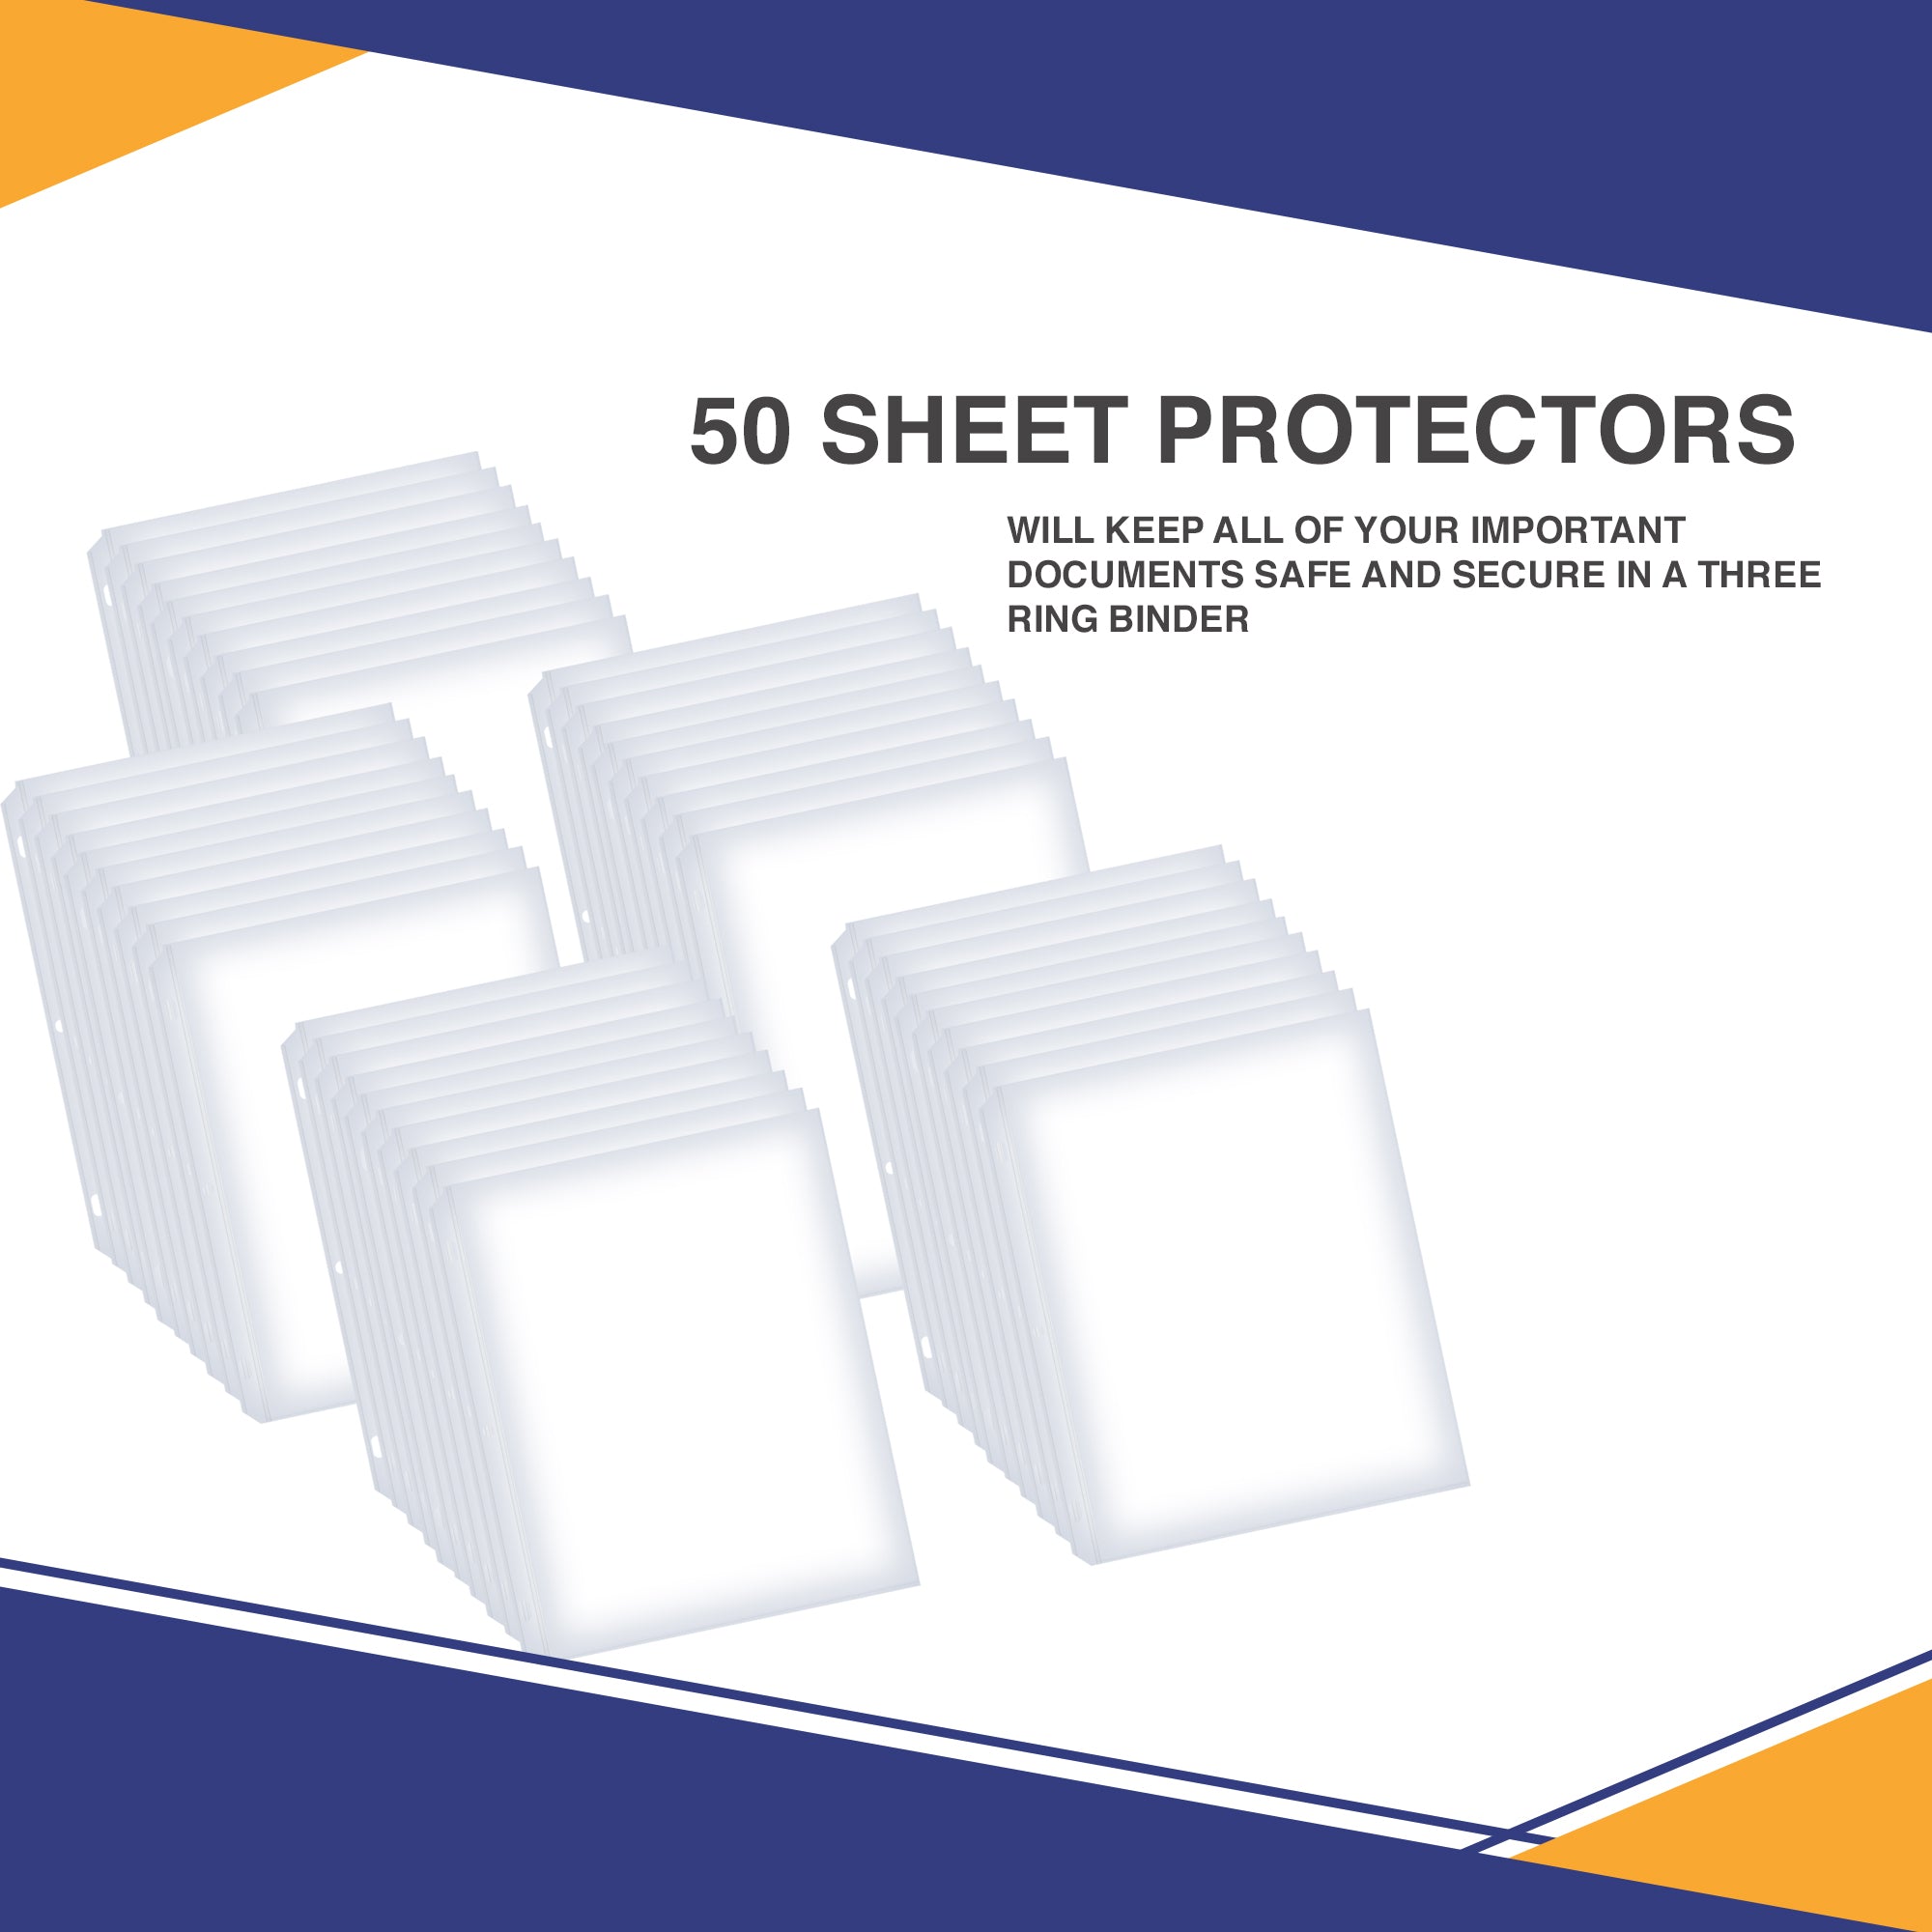 Heavy Duty Clear Sheet Protectors - 50 Pack, Reinforced Holes, 8.5 x 11 Inches, Acid Free/Archival Safe